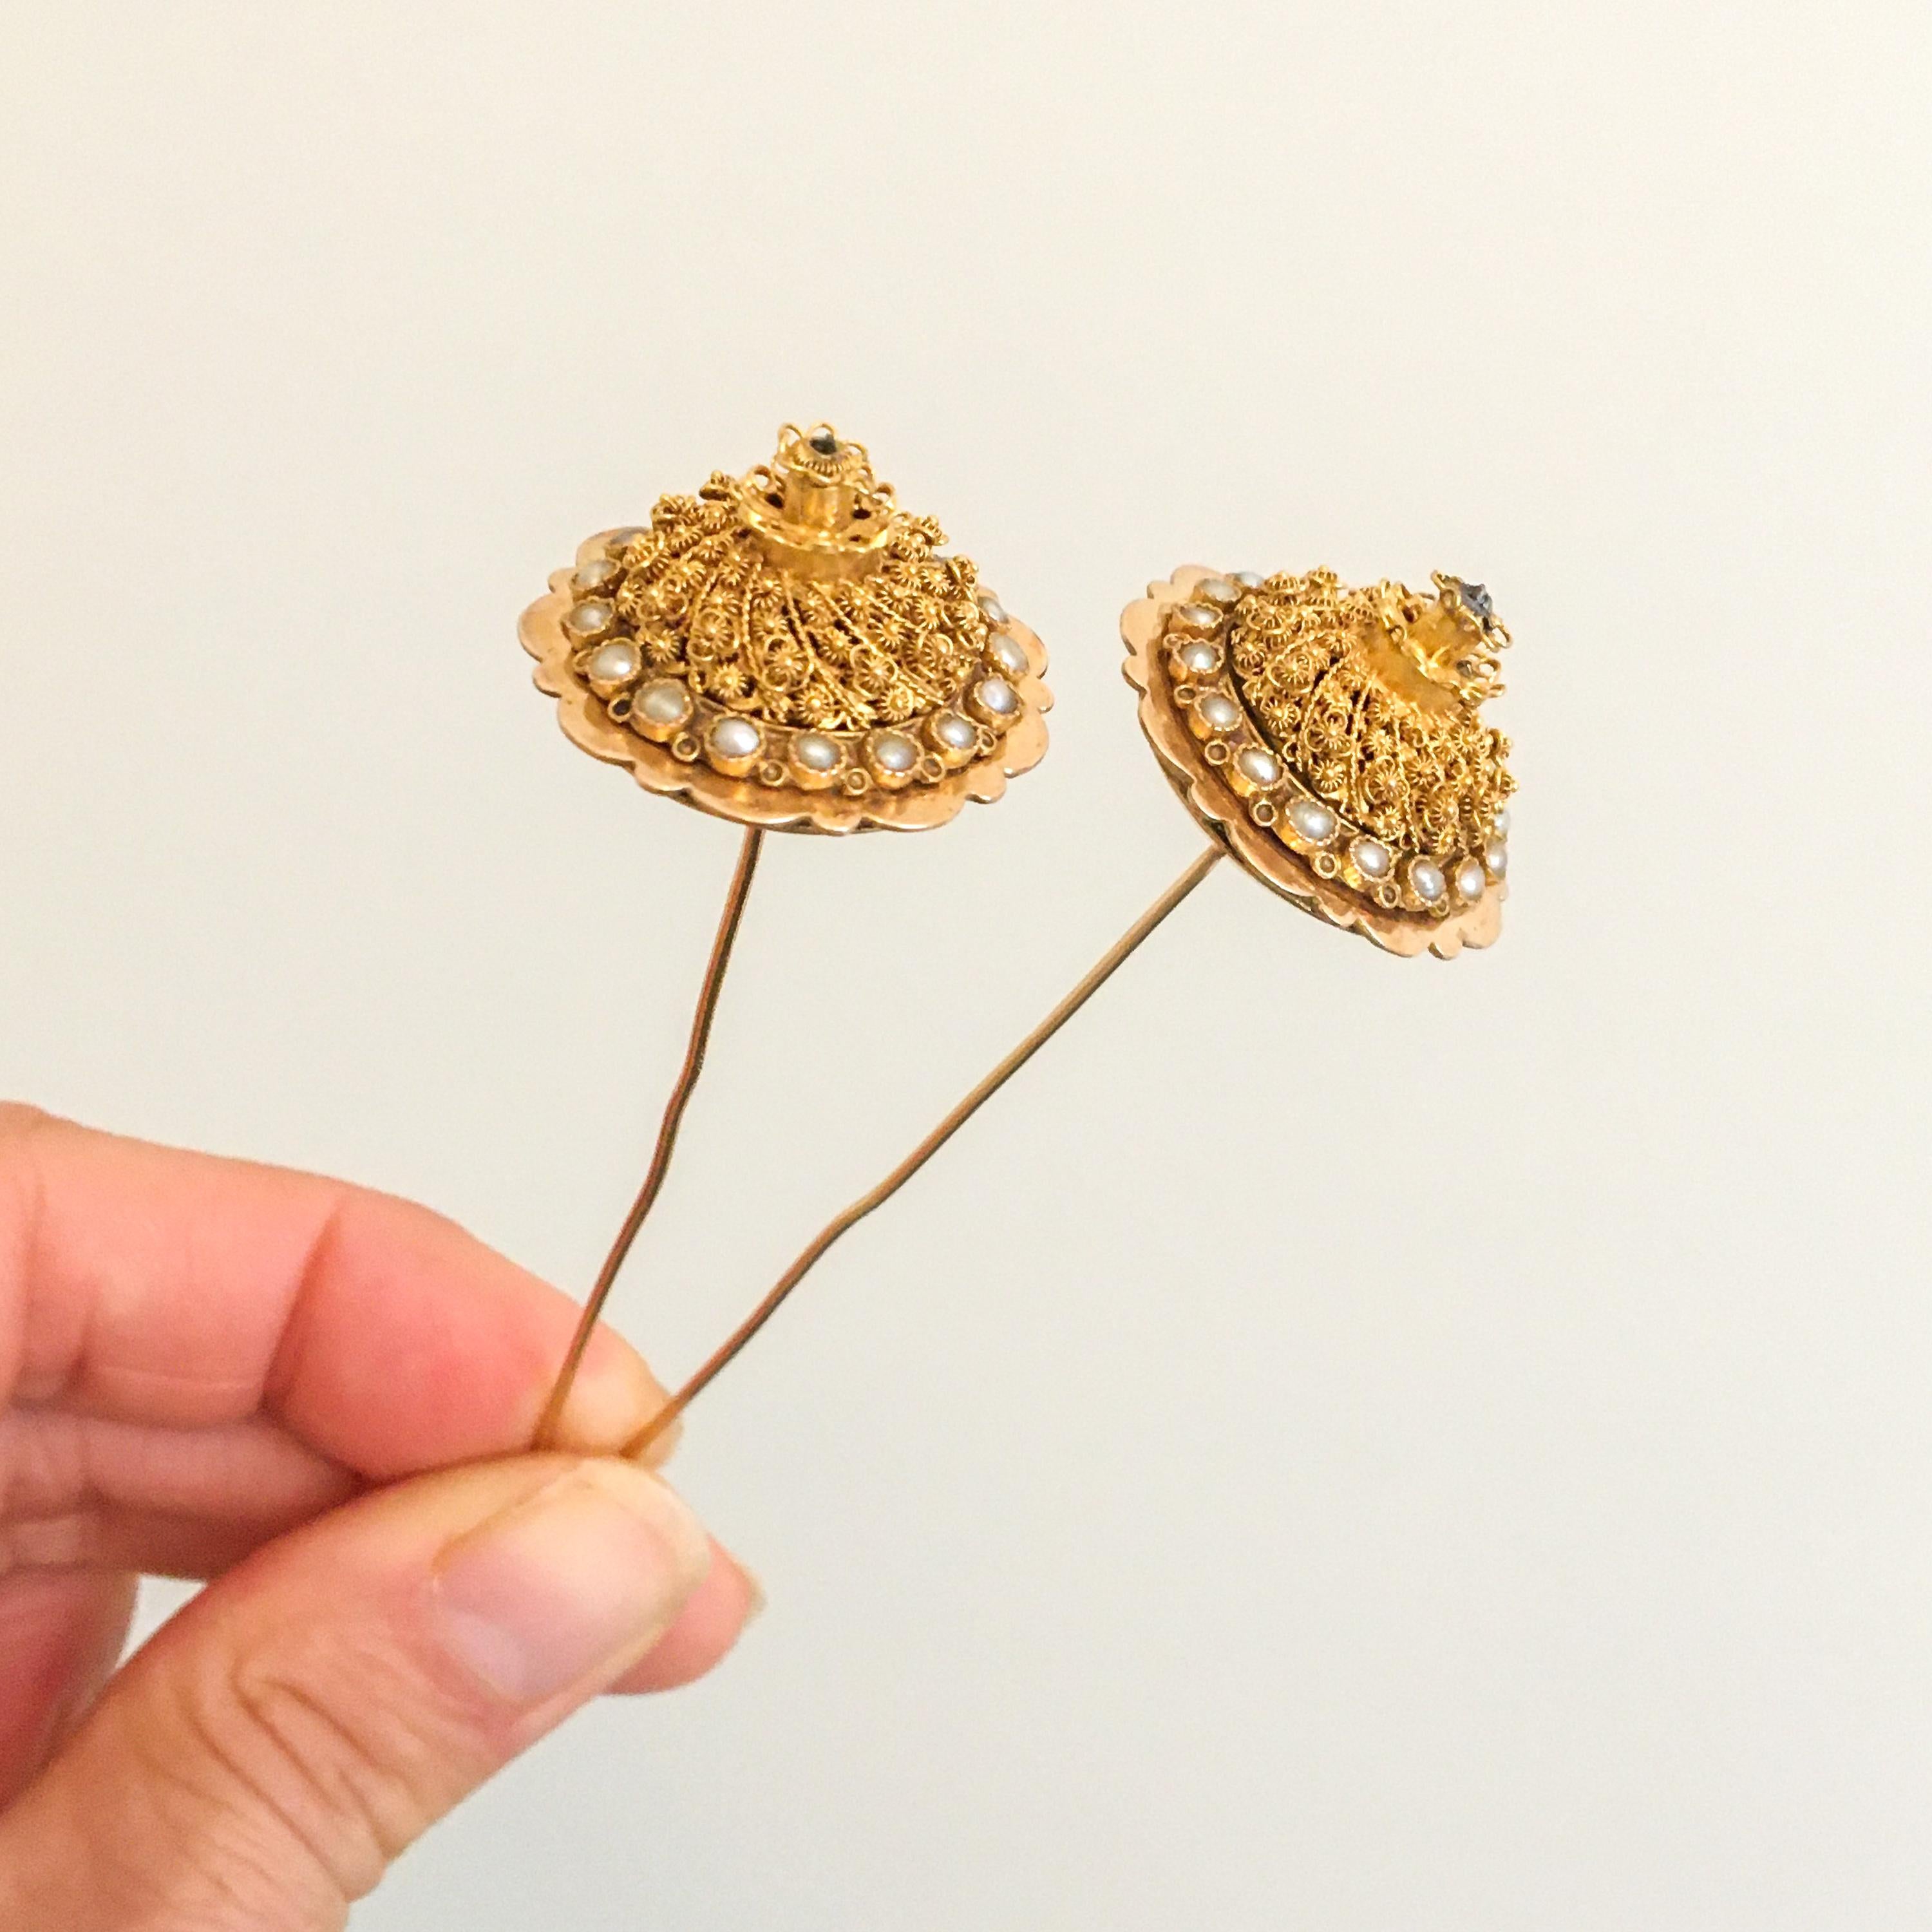 This is a pair of antique 14 karat yellow gold filigree and seed pearl lapel or stick pins. These pearl stick pins, in Dutch called 'tower pins', feature seventeen bright seed pearls. Each pin is decorated with cannetille and fine filigree, while